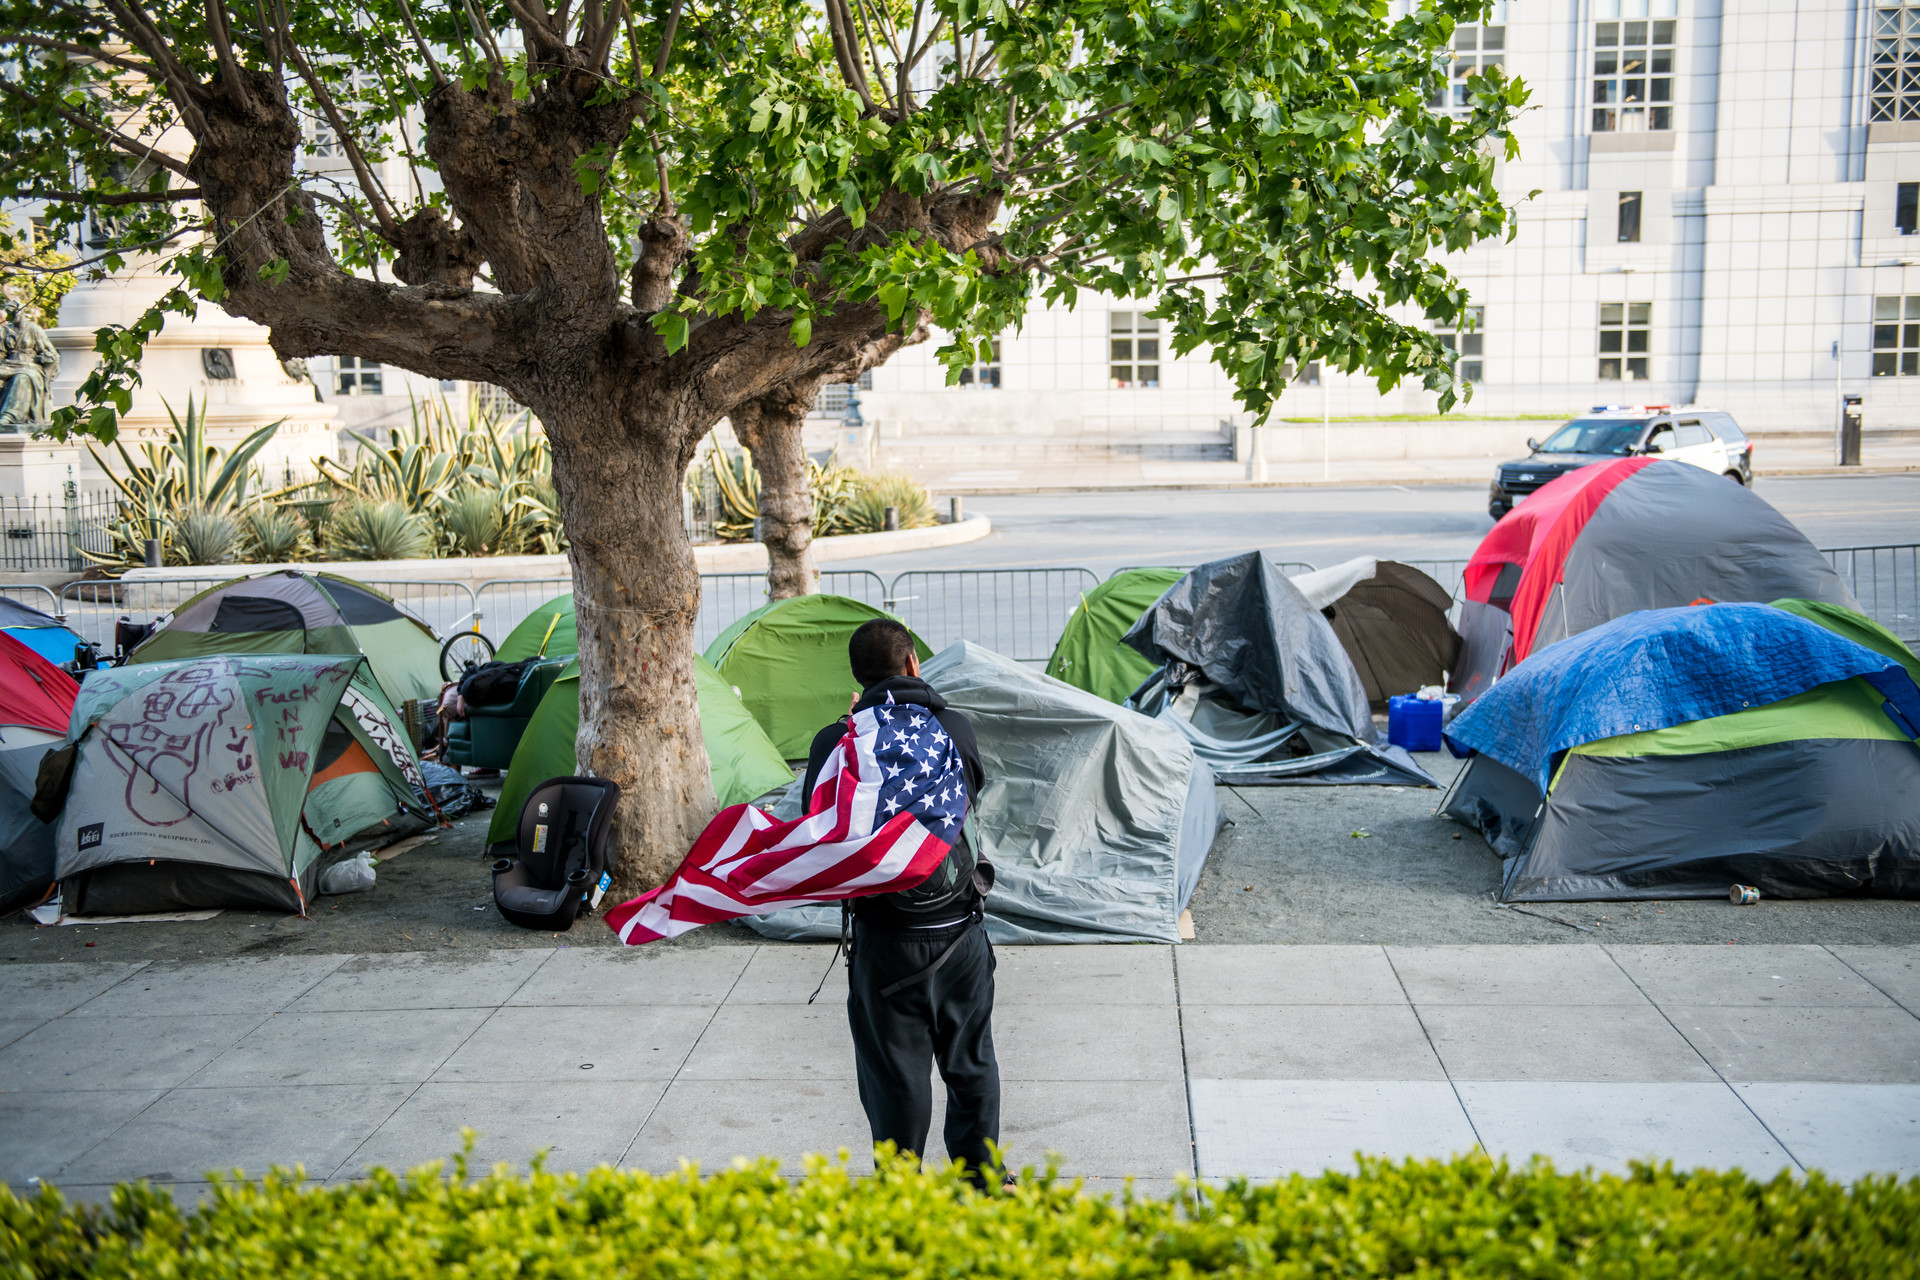 Tents line a gravel sidewalk off Fulton Street near City Hall on May 5, 2020. On Wednesday, city staffers started drawing out socially distant spaces with chalk on the street for the tents to stay.